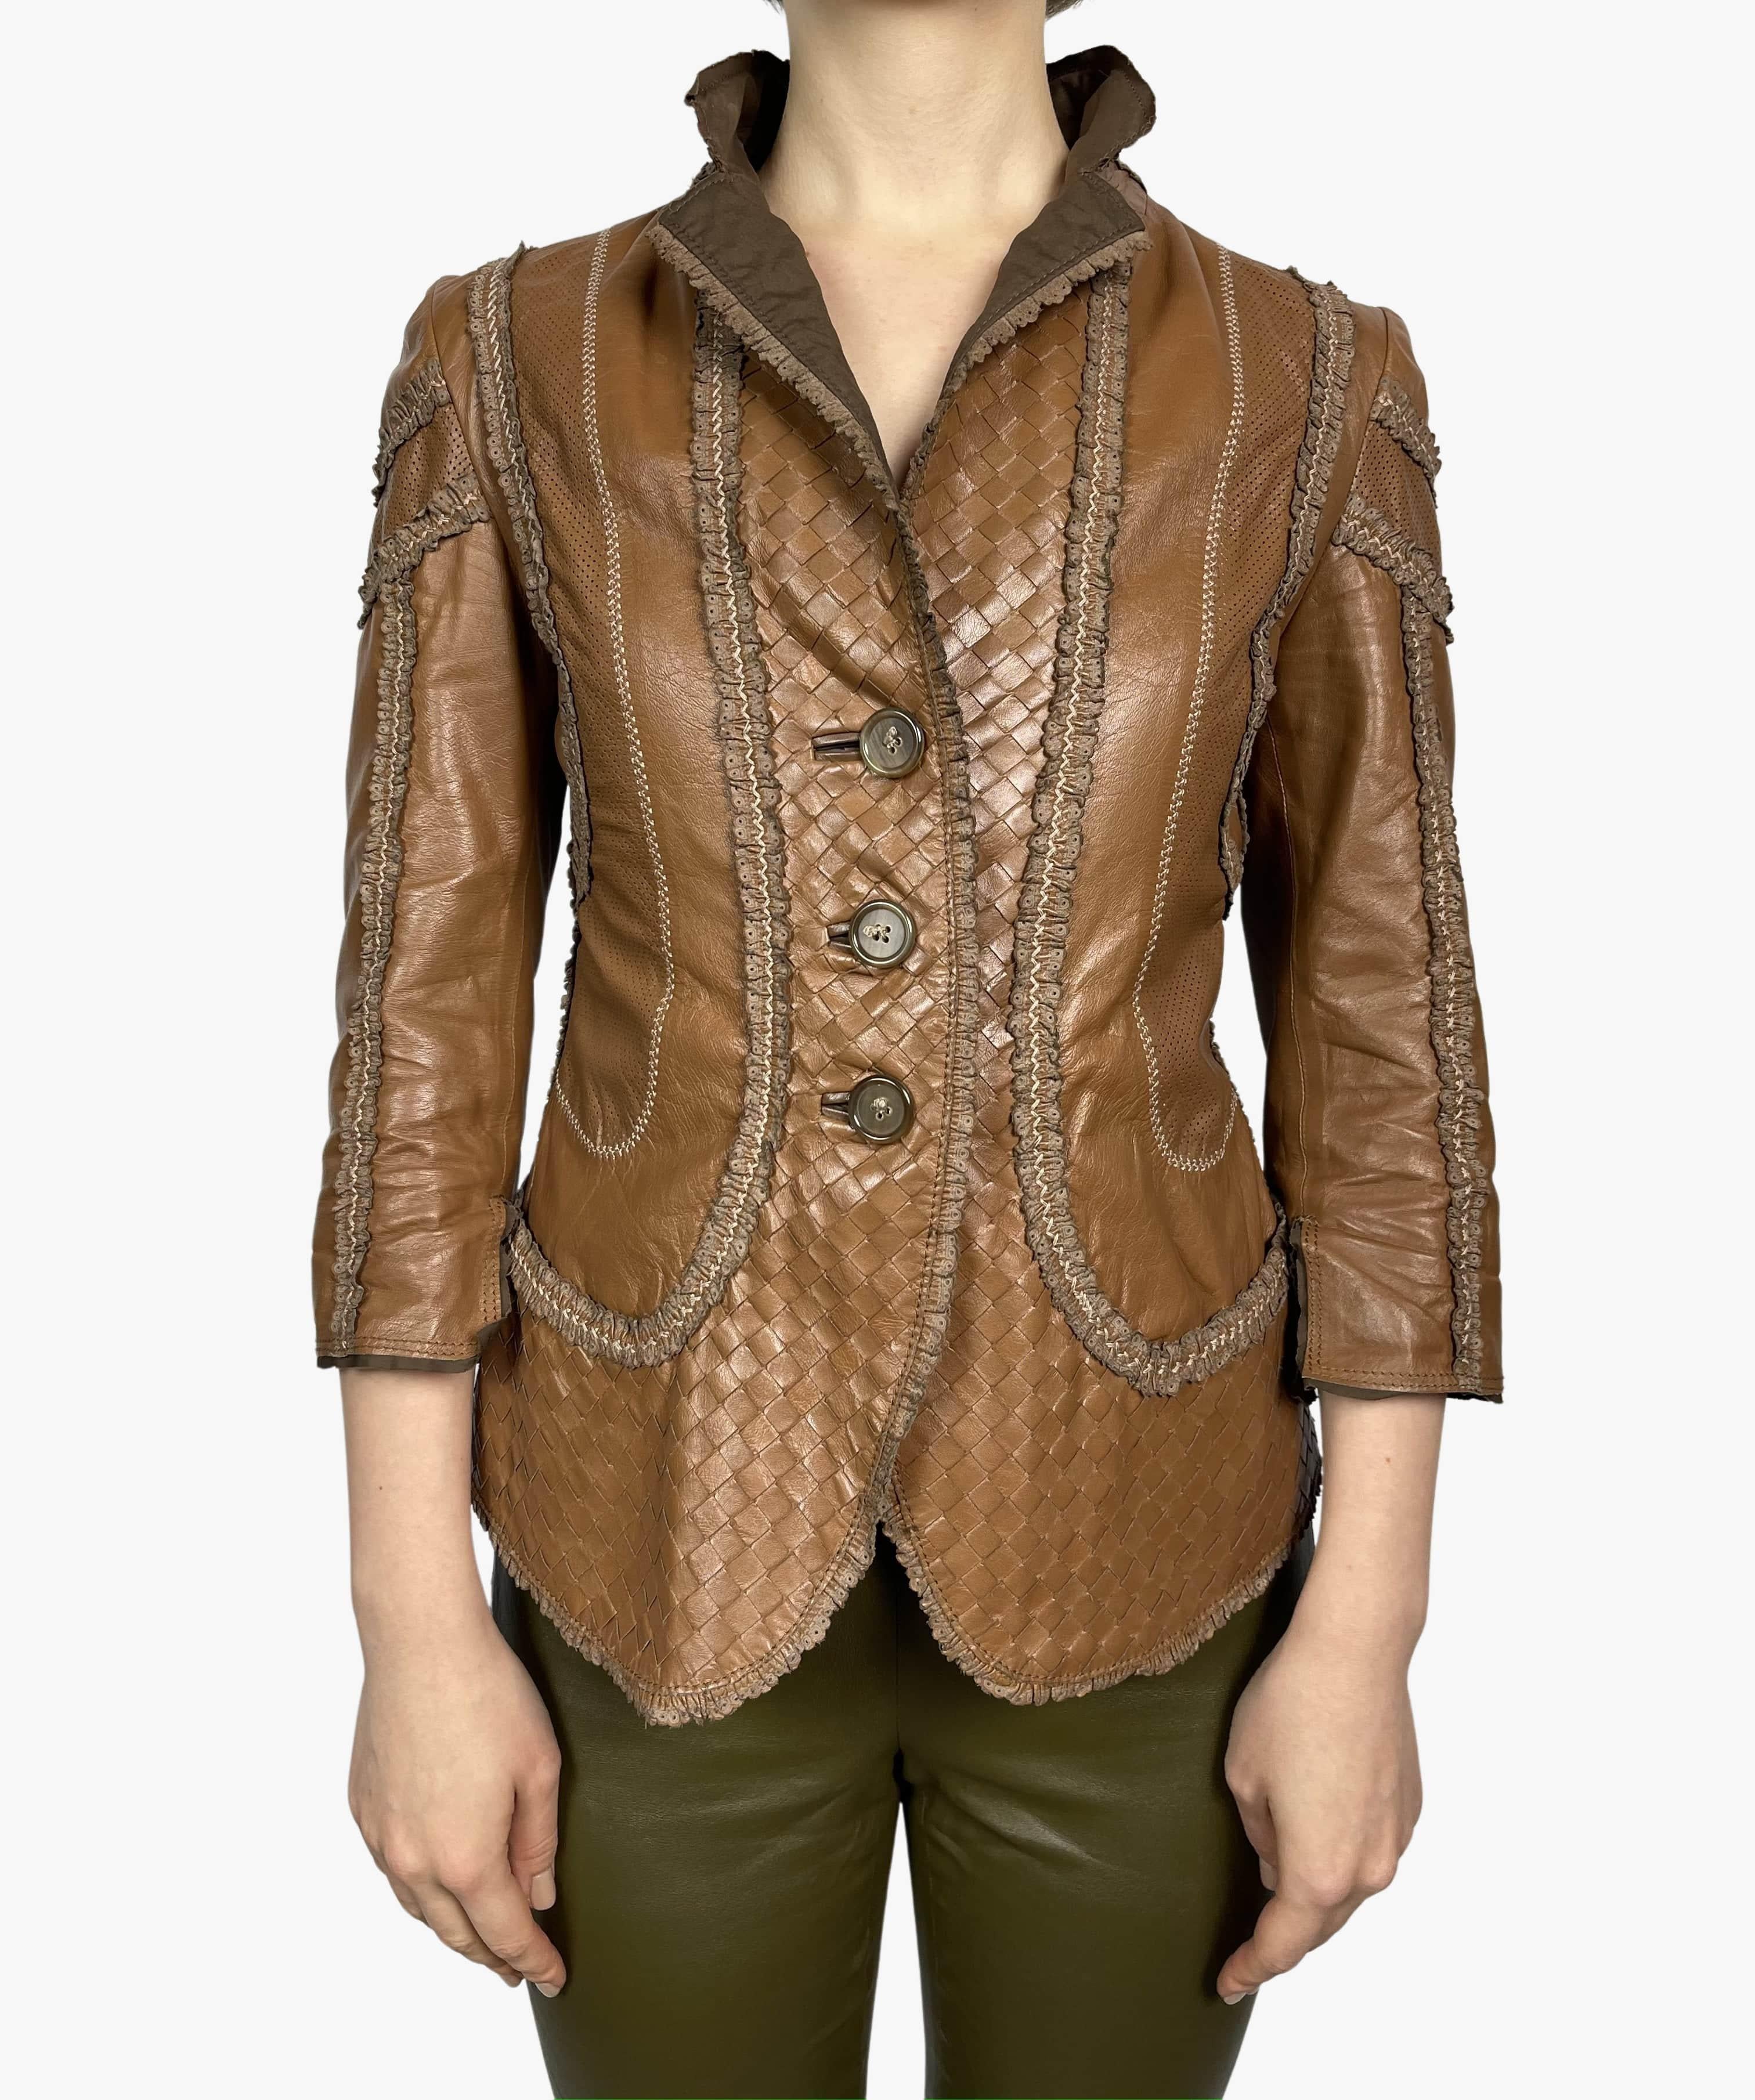 Bottega Venetta runway leather blazer in tobacco-brown color by Tomas Maier. Embellished with decorative leather elements. 
Season: Spring-Summer 2006 
Composition: 100% leather 
Condition: Good. Some signs of wear at exterior and interior. 
Size: S